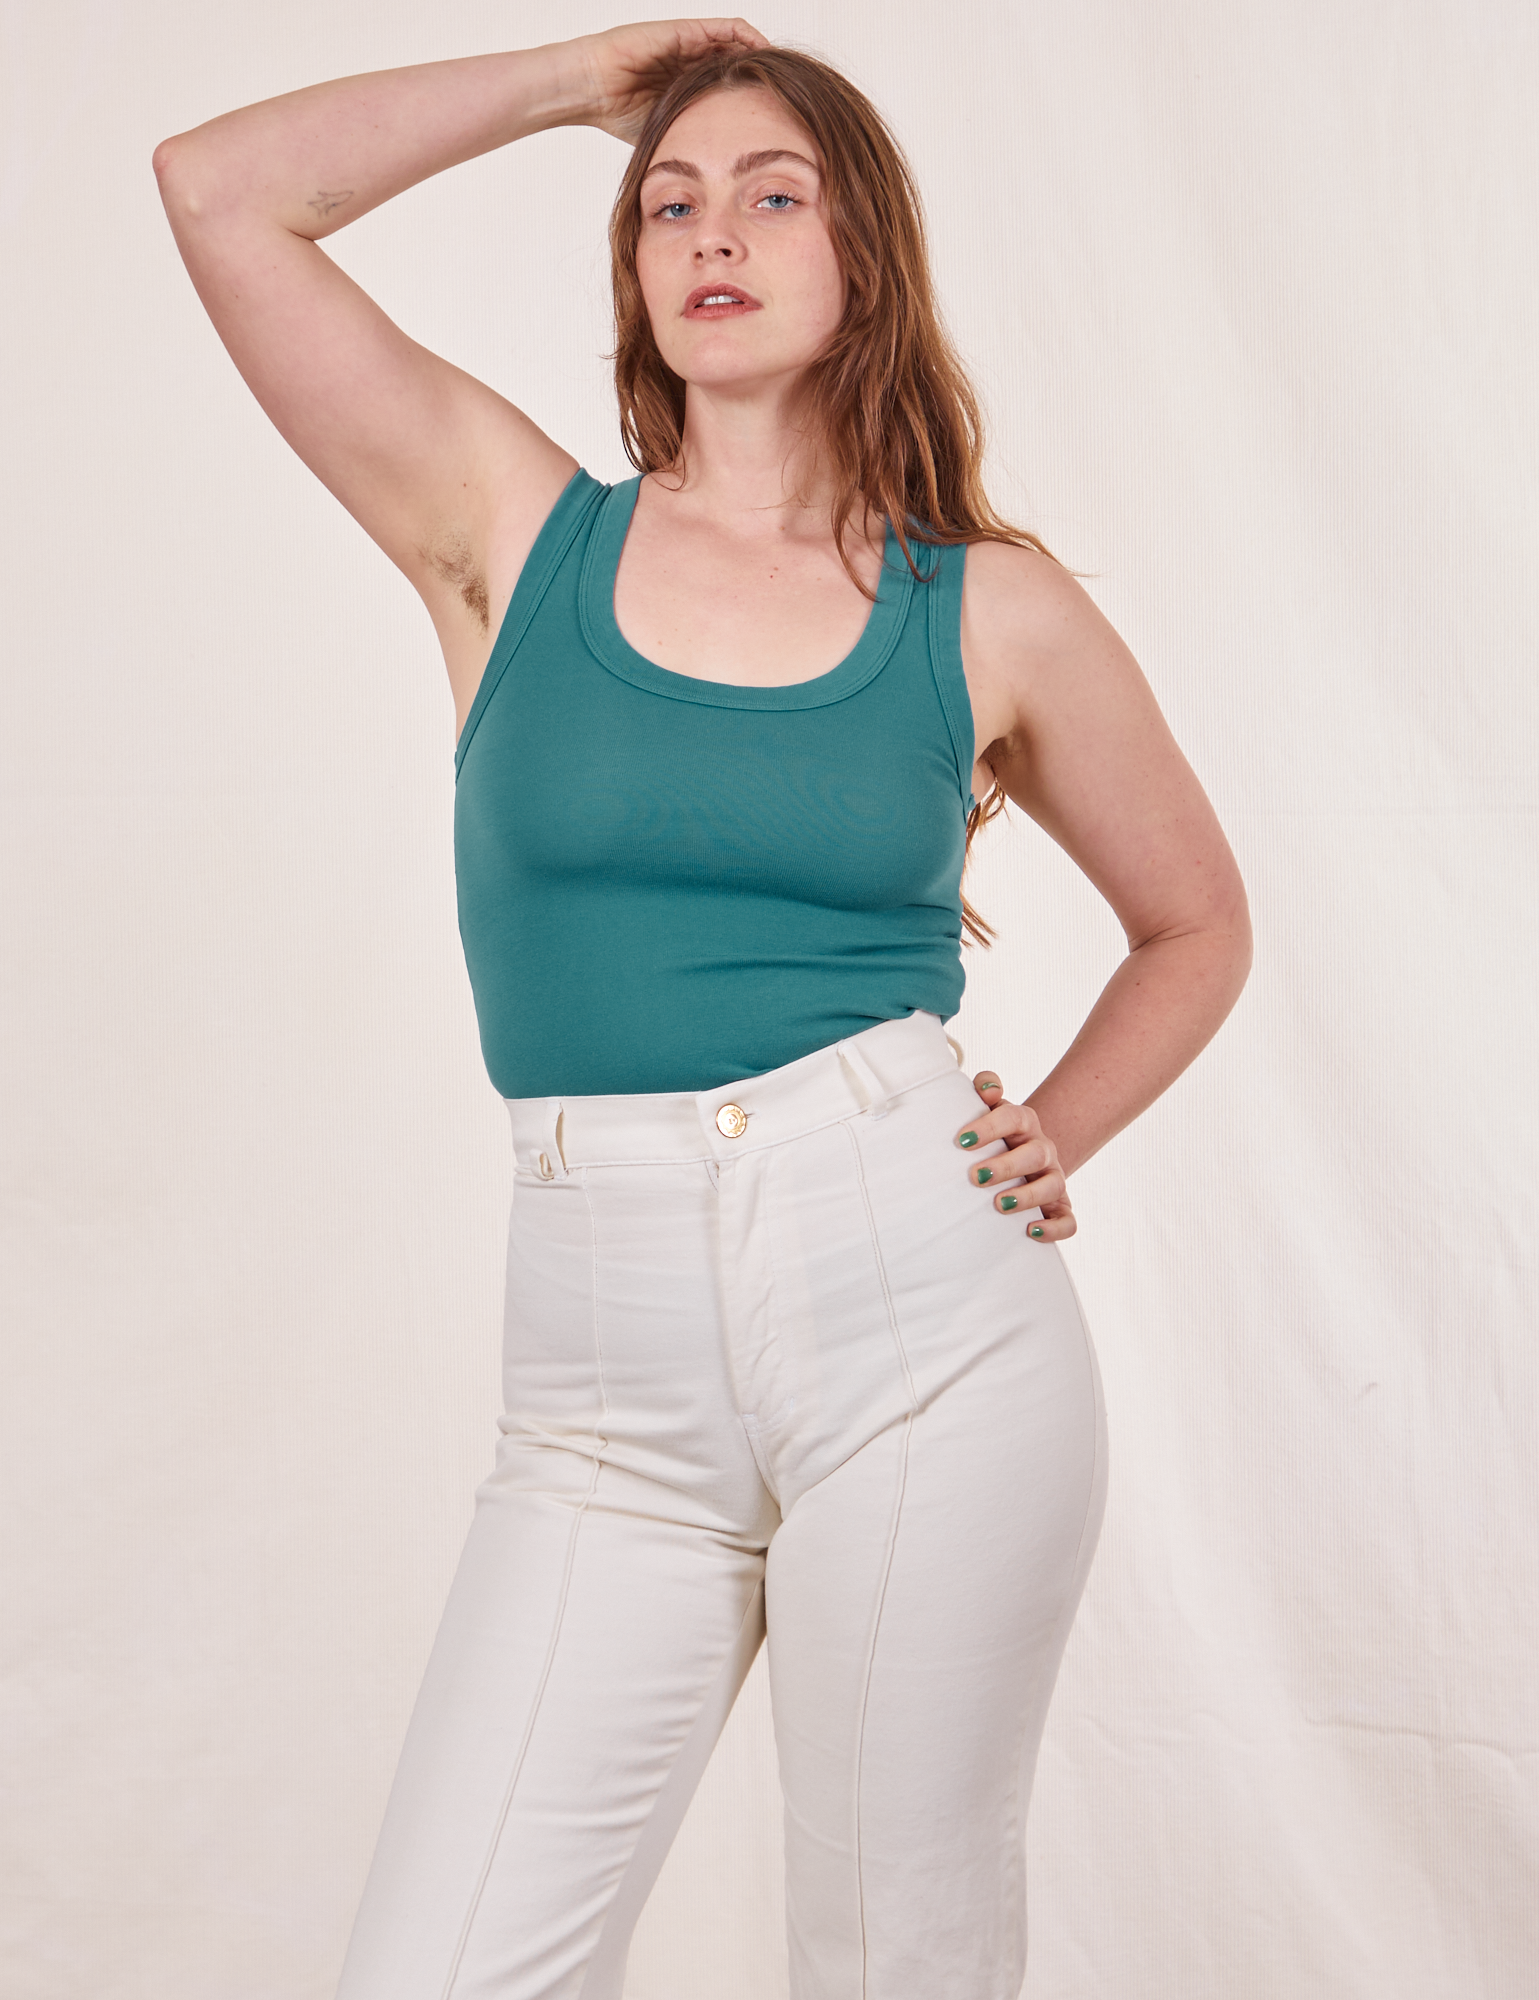 Allison is wearing size XXS Tank Top in Marine Blue paired with vintage off-white Western Pants